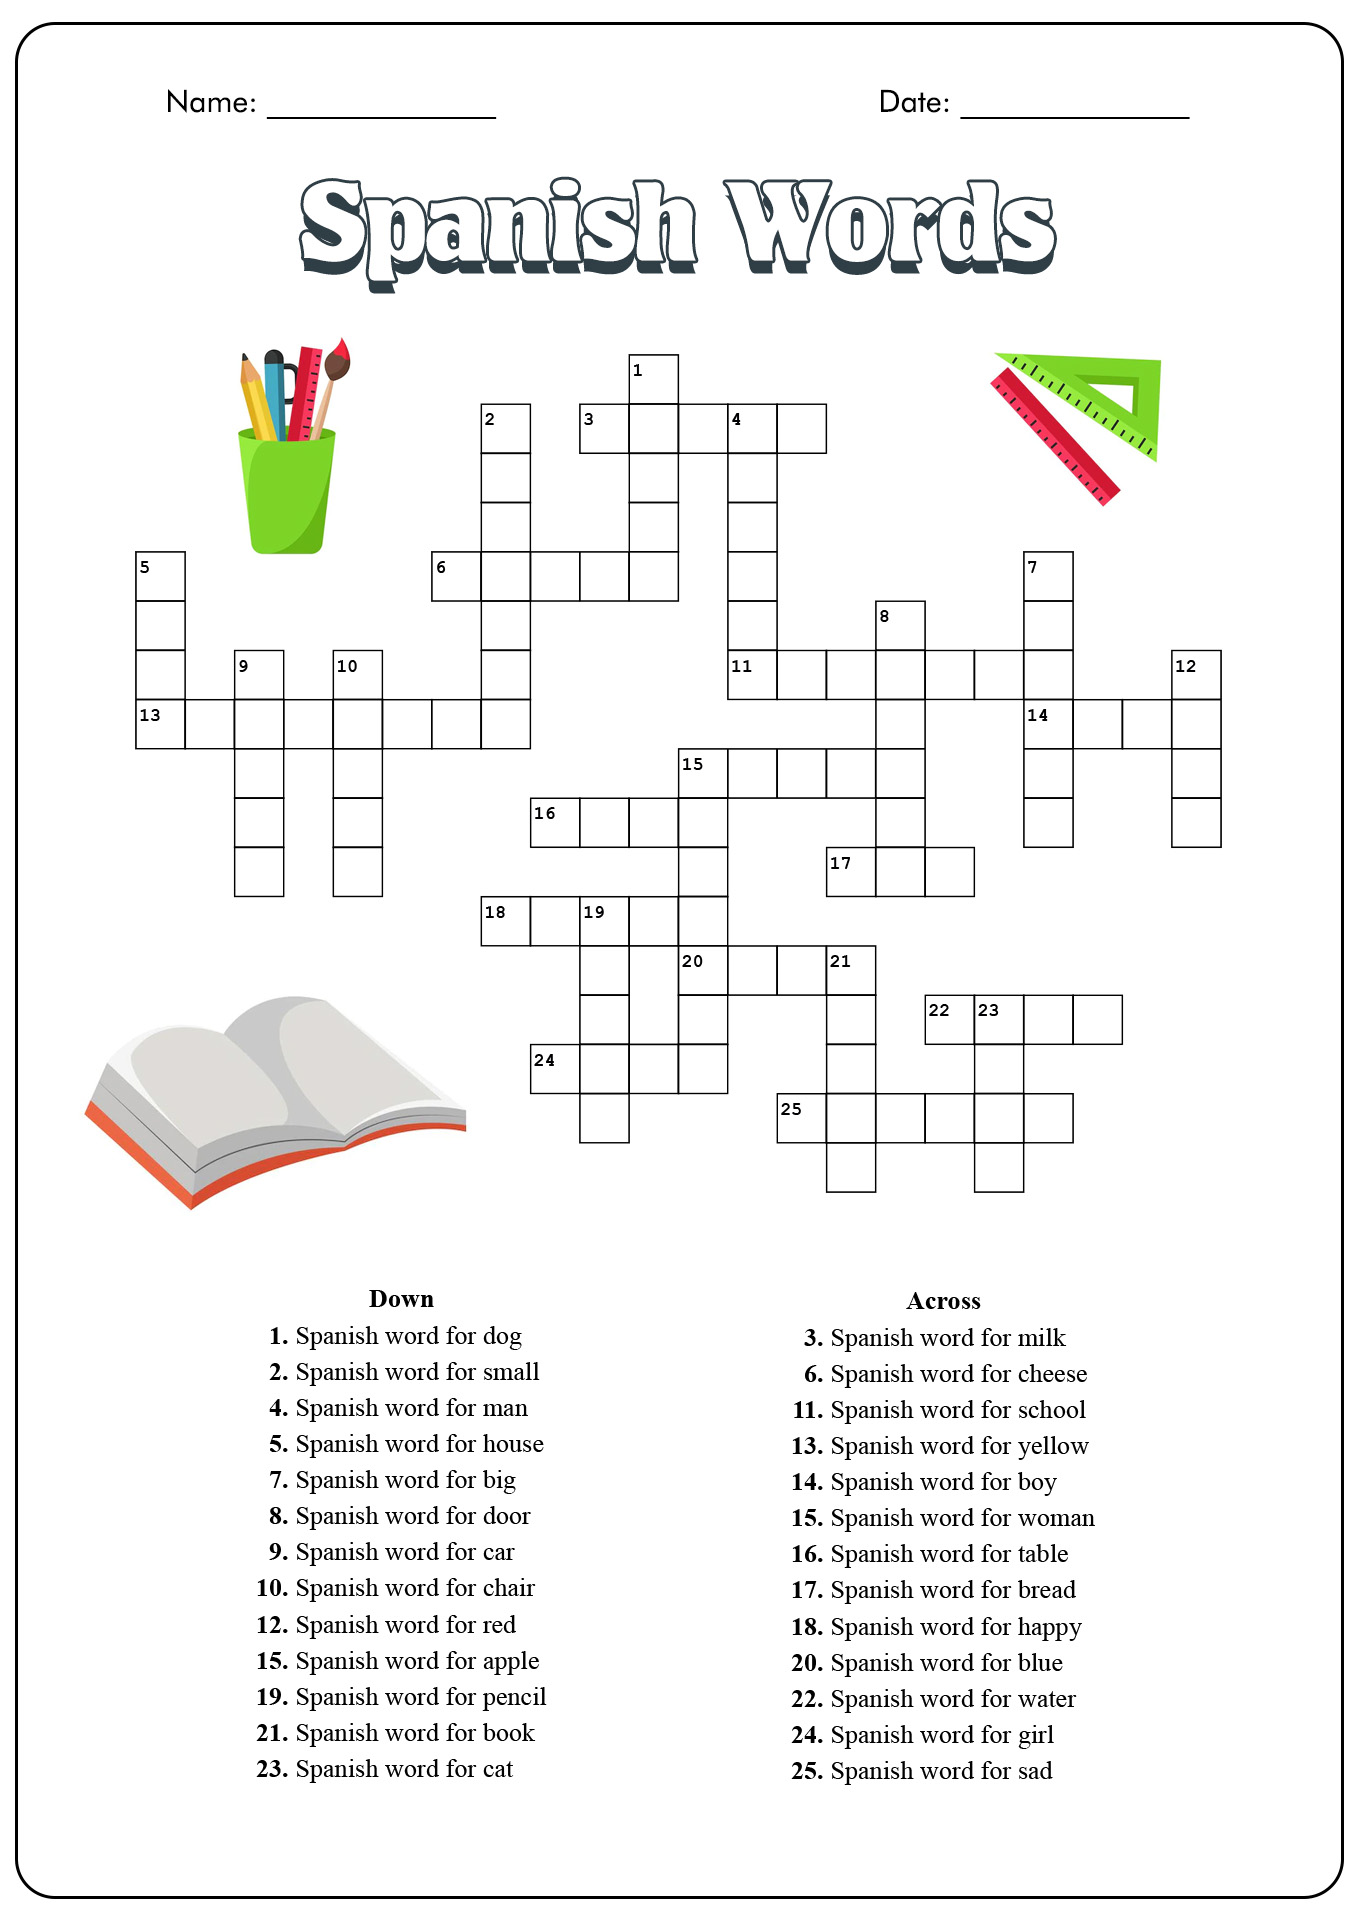 free-printable-word-search-in-spanish-printable-word-searches